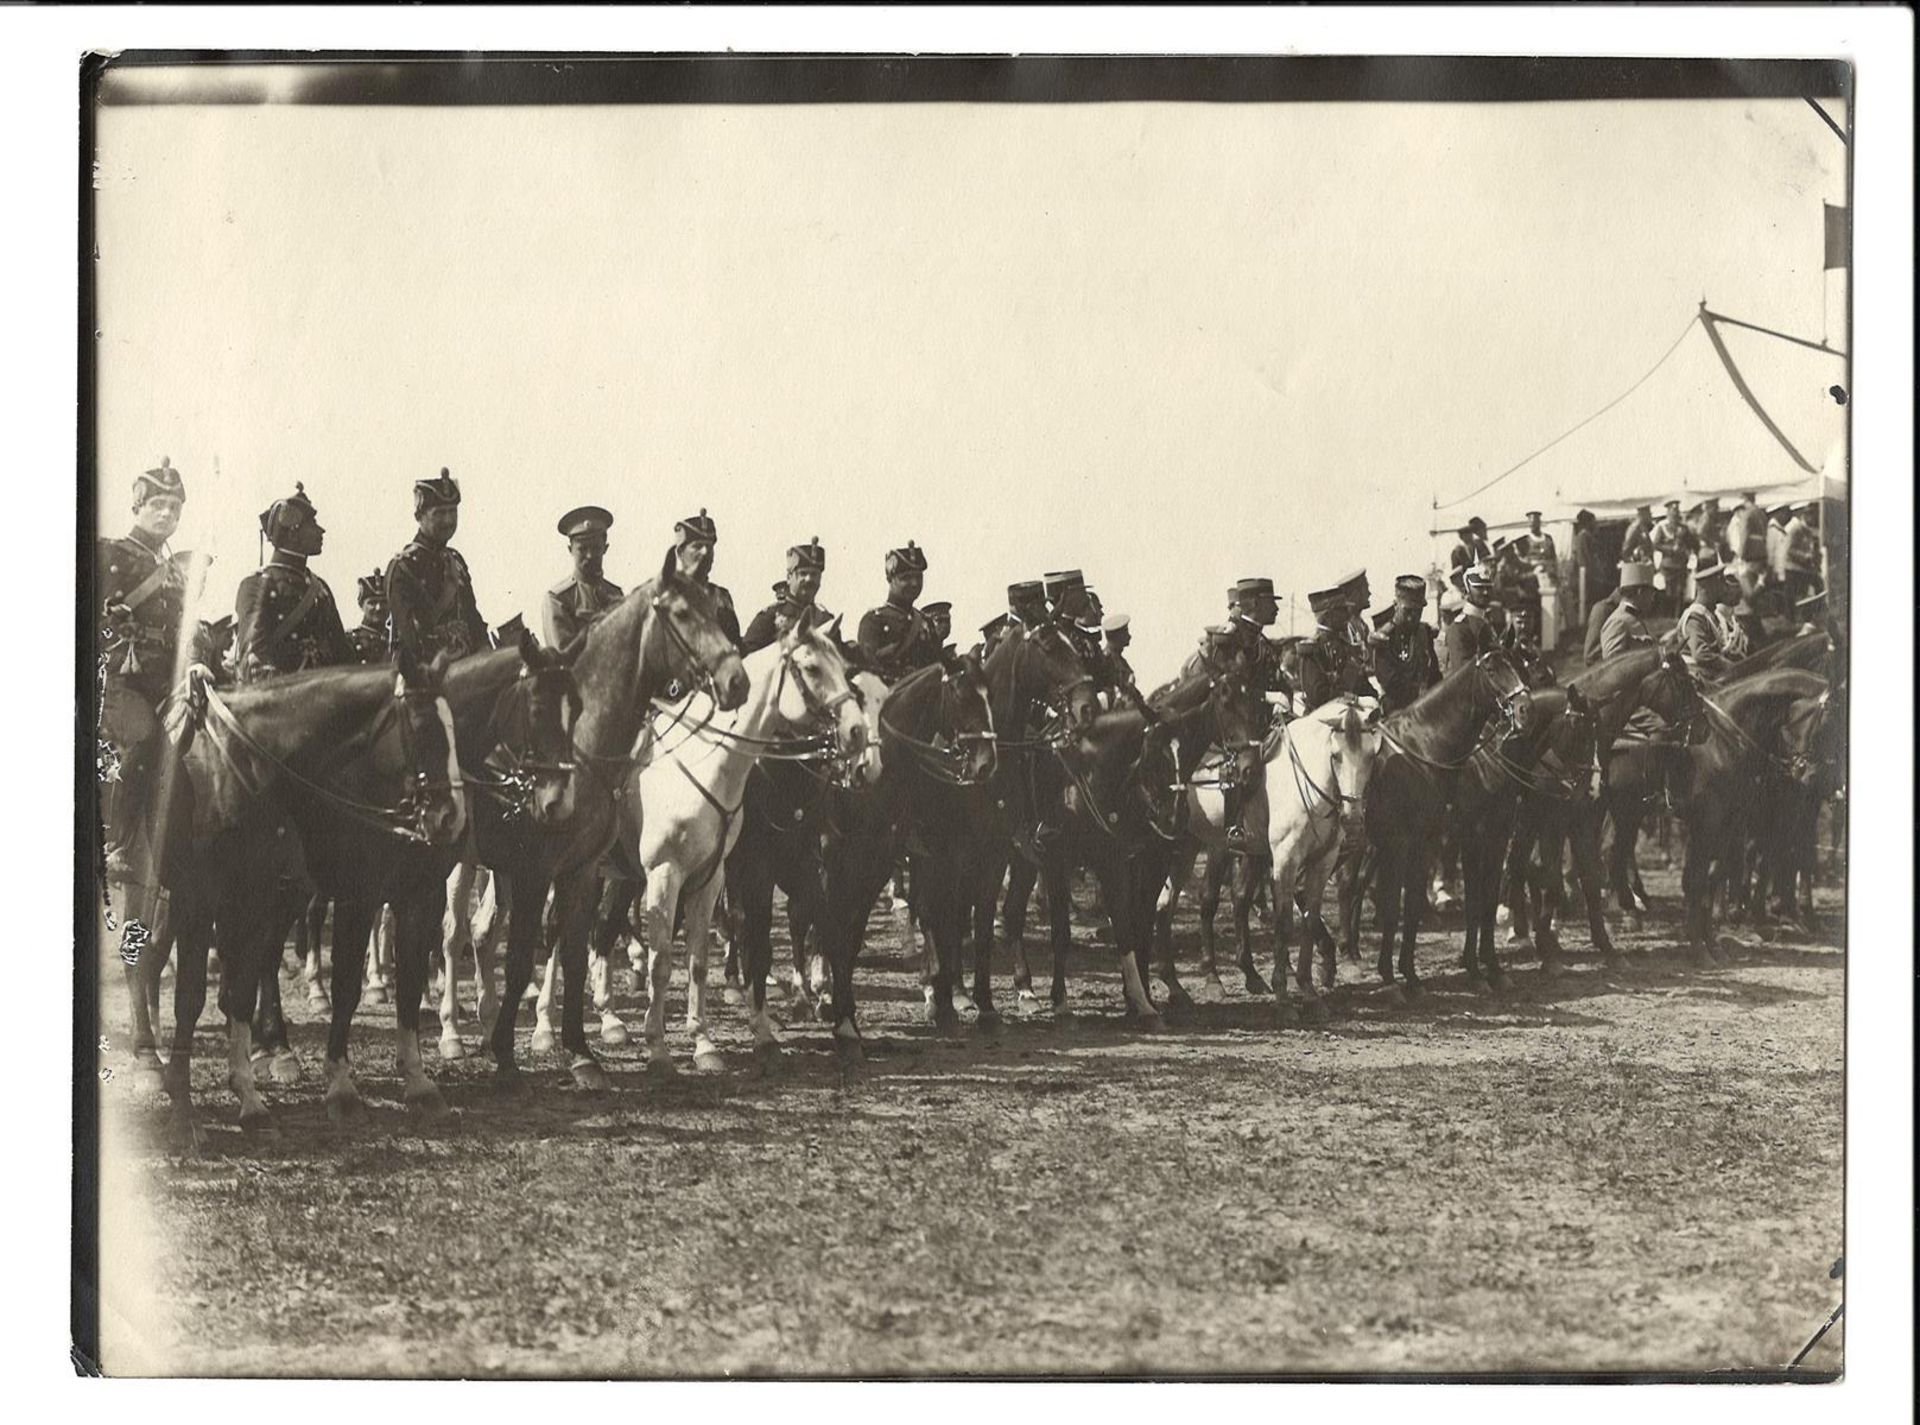 [Russian Empire]. Karl Bulla. Allies of World War I on the Krasnoselsky maneuvers. 1914. Photograph.